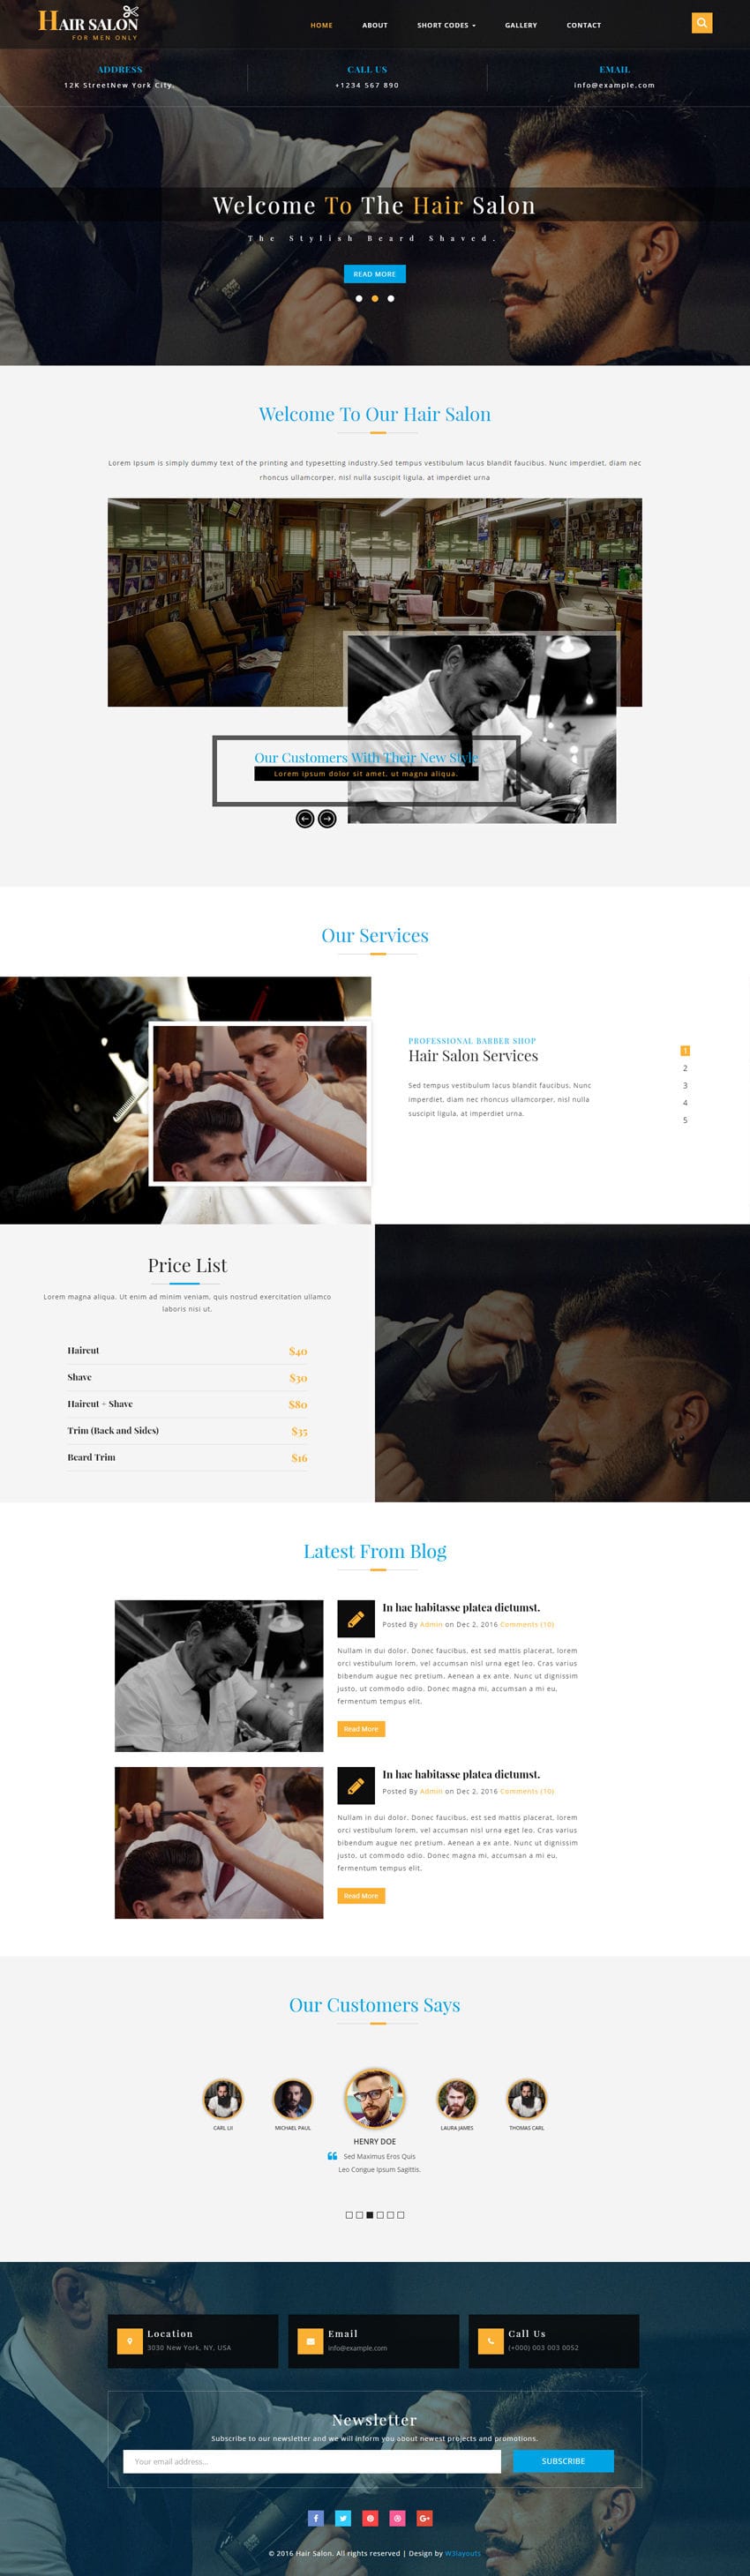 Hair Salon a Beauty and spa Flat Bootstrap Responsive Web Template